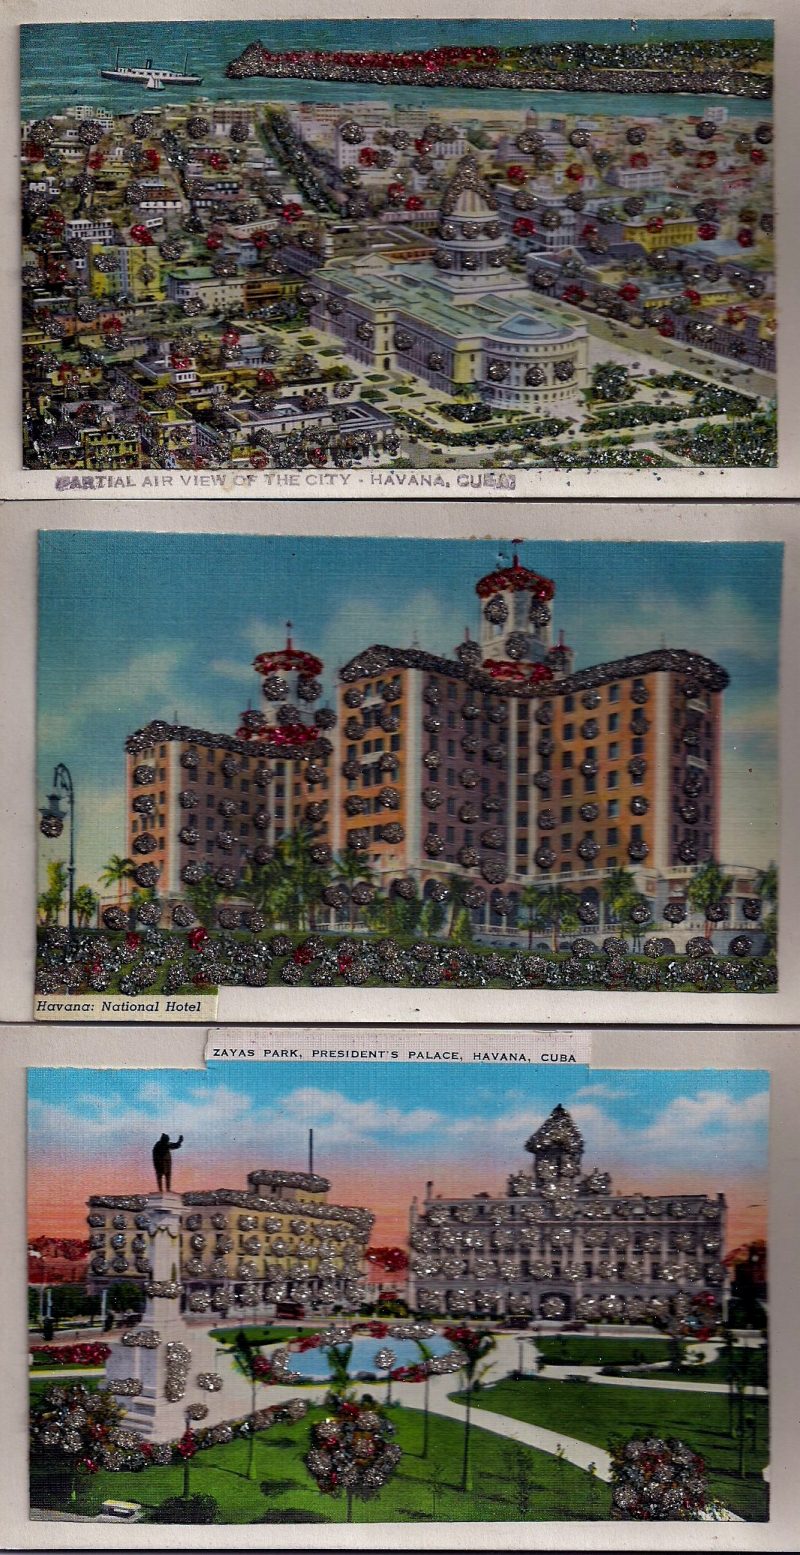 Havana Cuba, Set of 3 Vintage Postcards with tons of glitter as highlights, 5.5 x 3.5 inches each, $25 for the set.